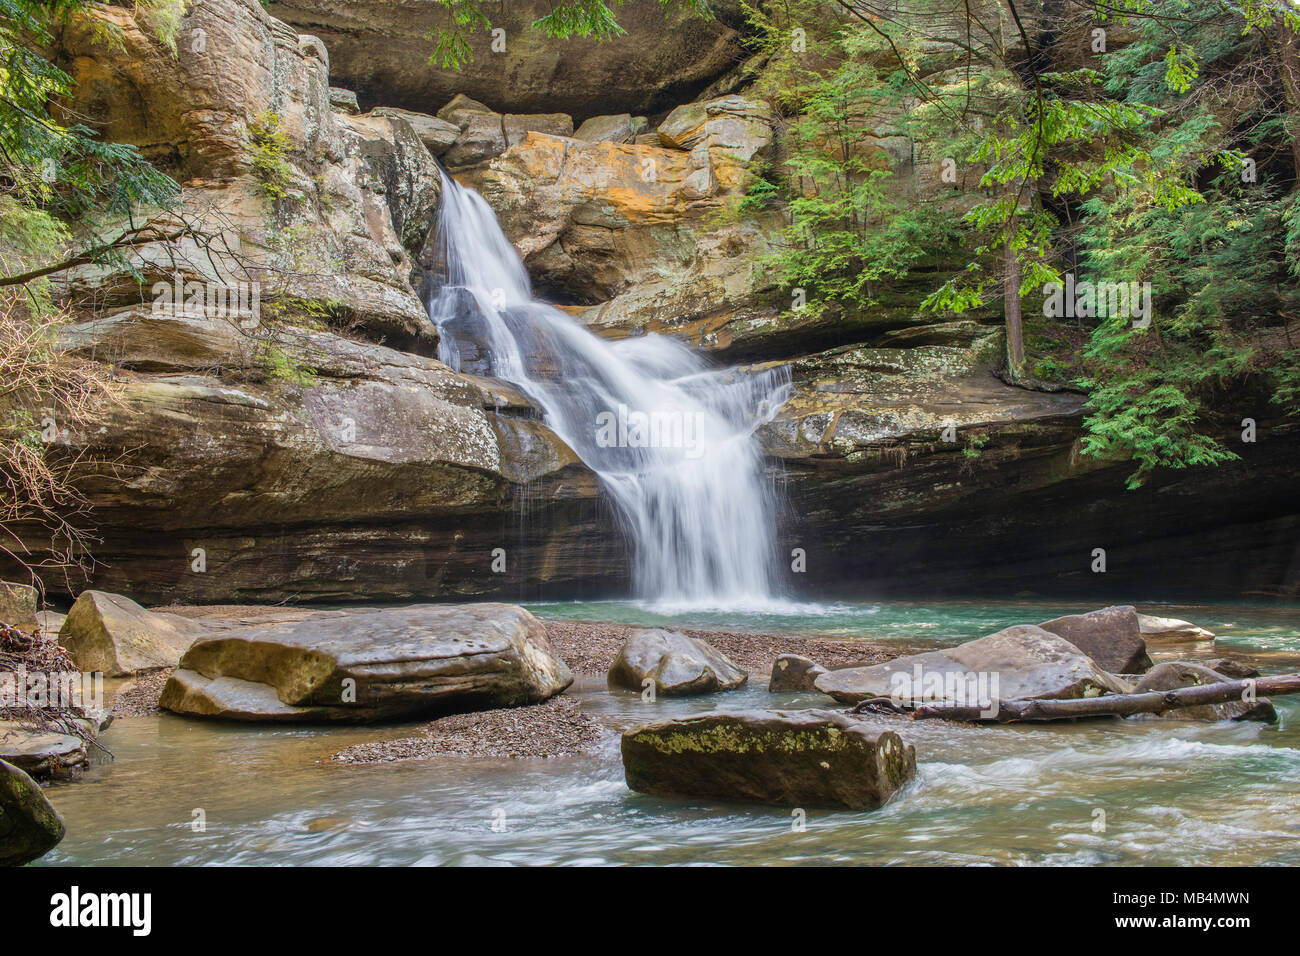 Cedar Falls located in Hocking Hills State Park. Stock Photo